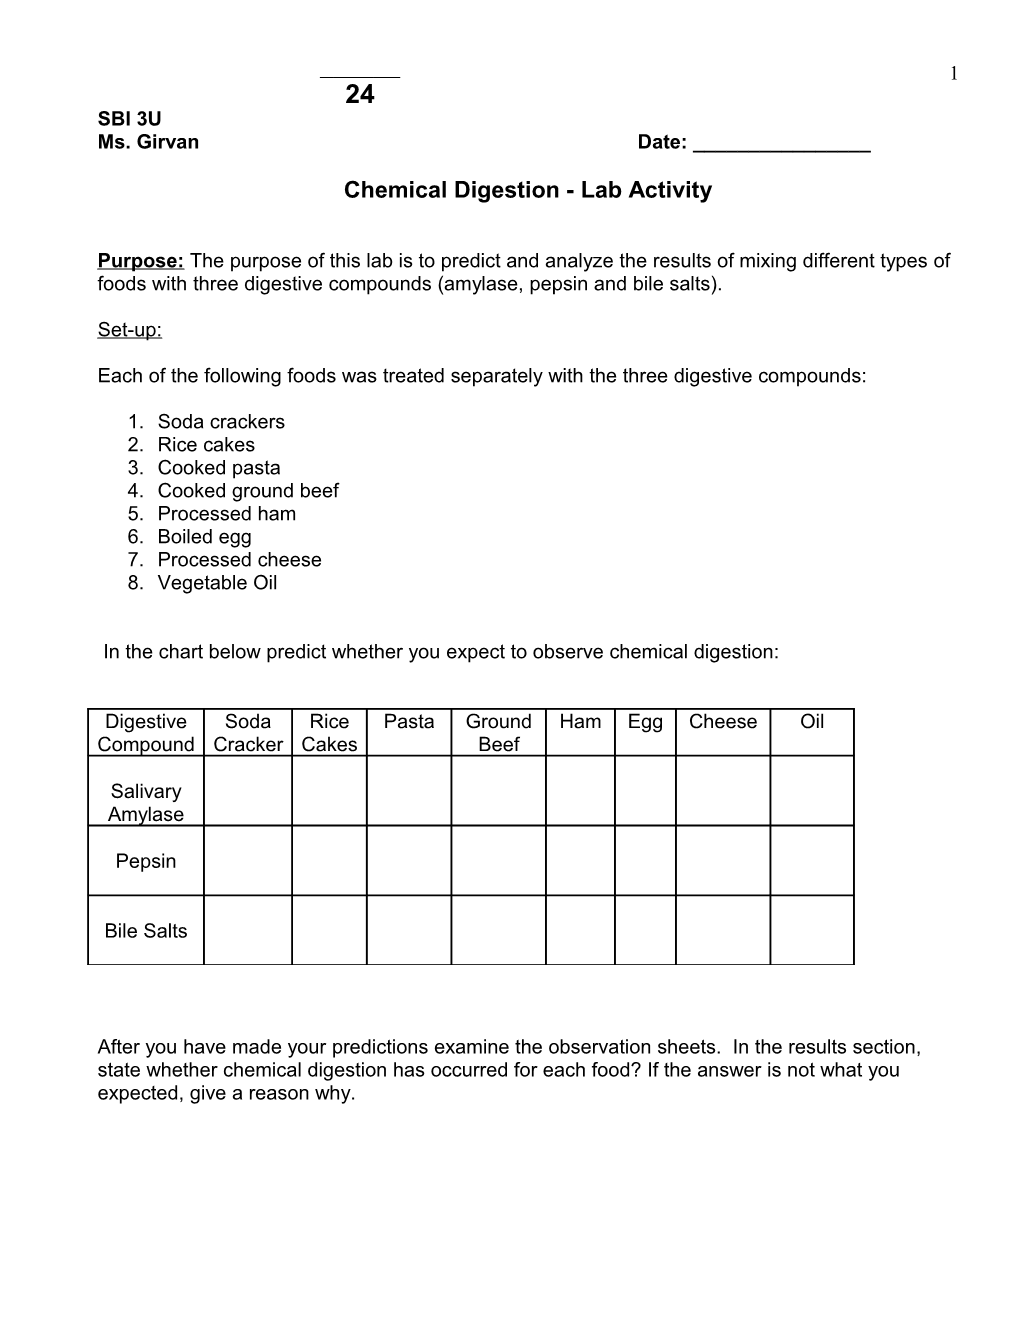 Chemical Digestion - Lab Activity